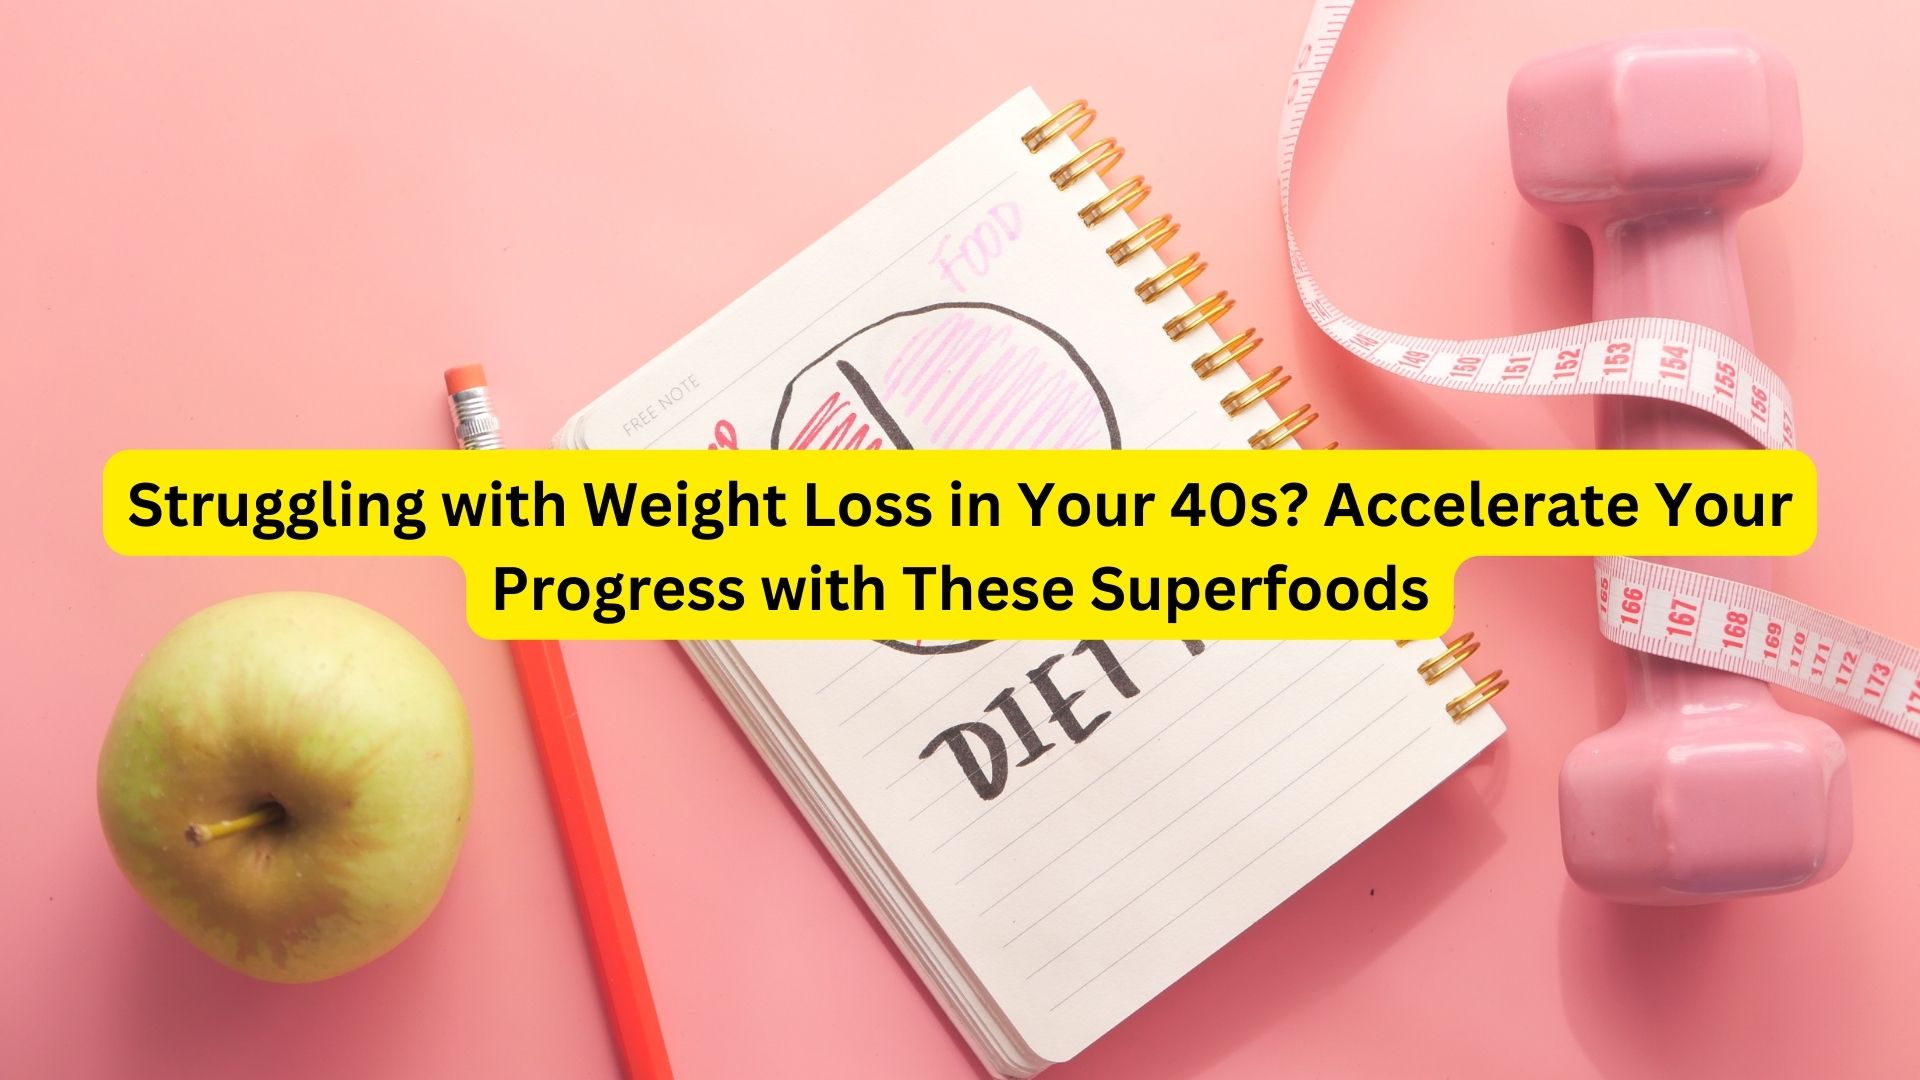 Struggling with Weight Loss in Your 40s? Accelerate Your Progress with These Superfoods